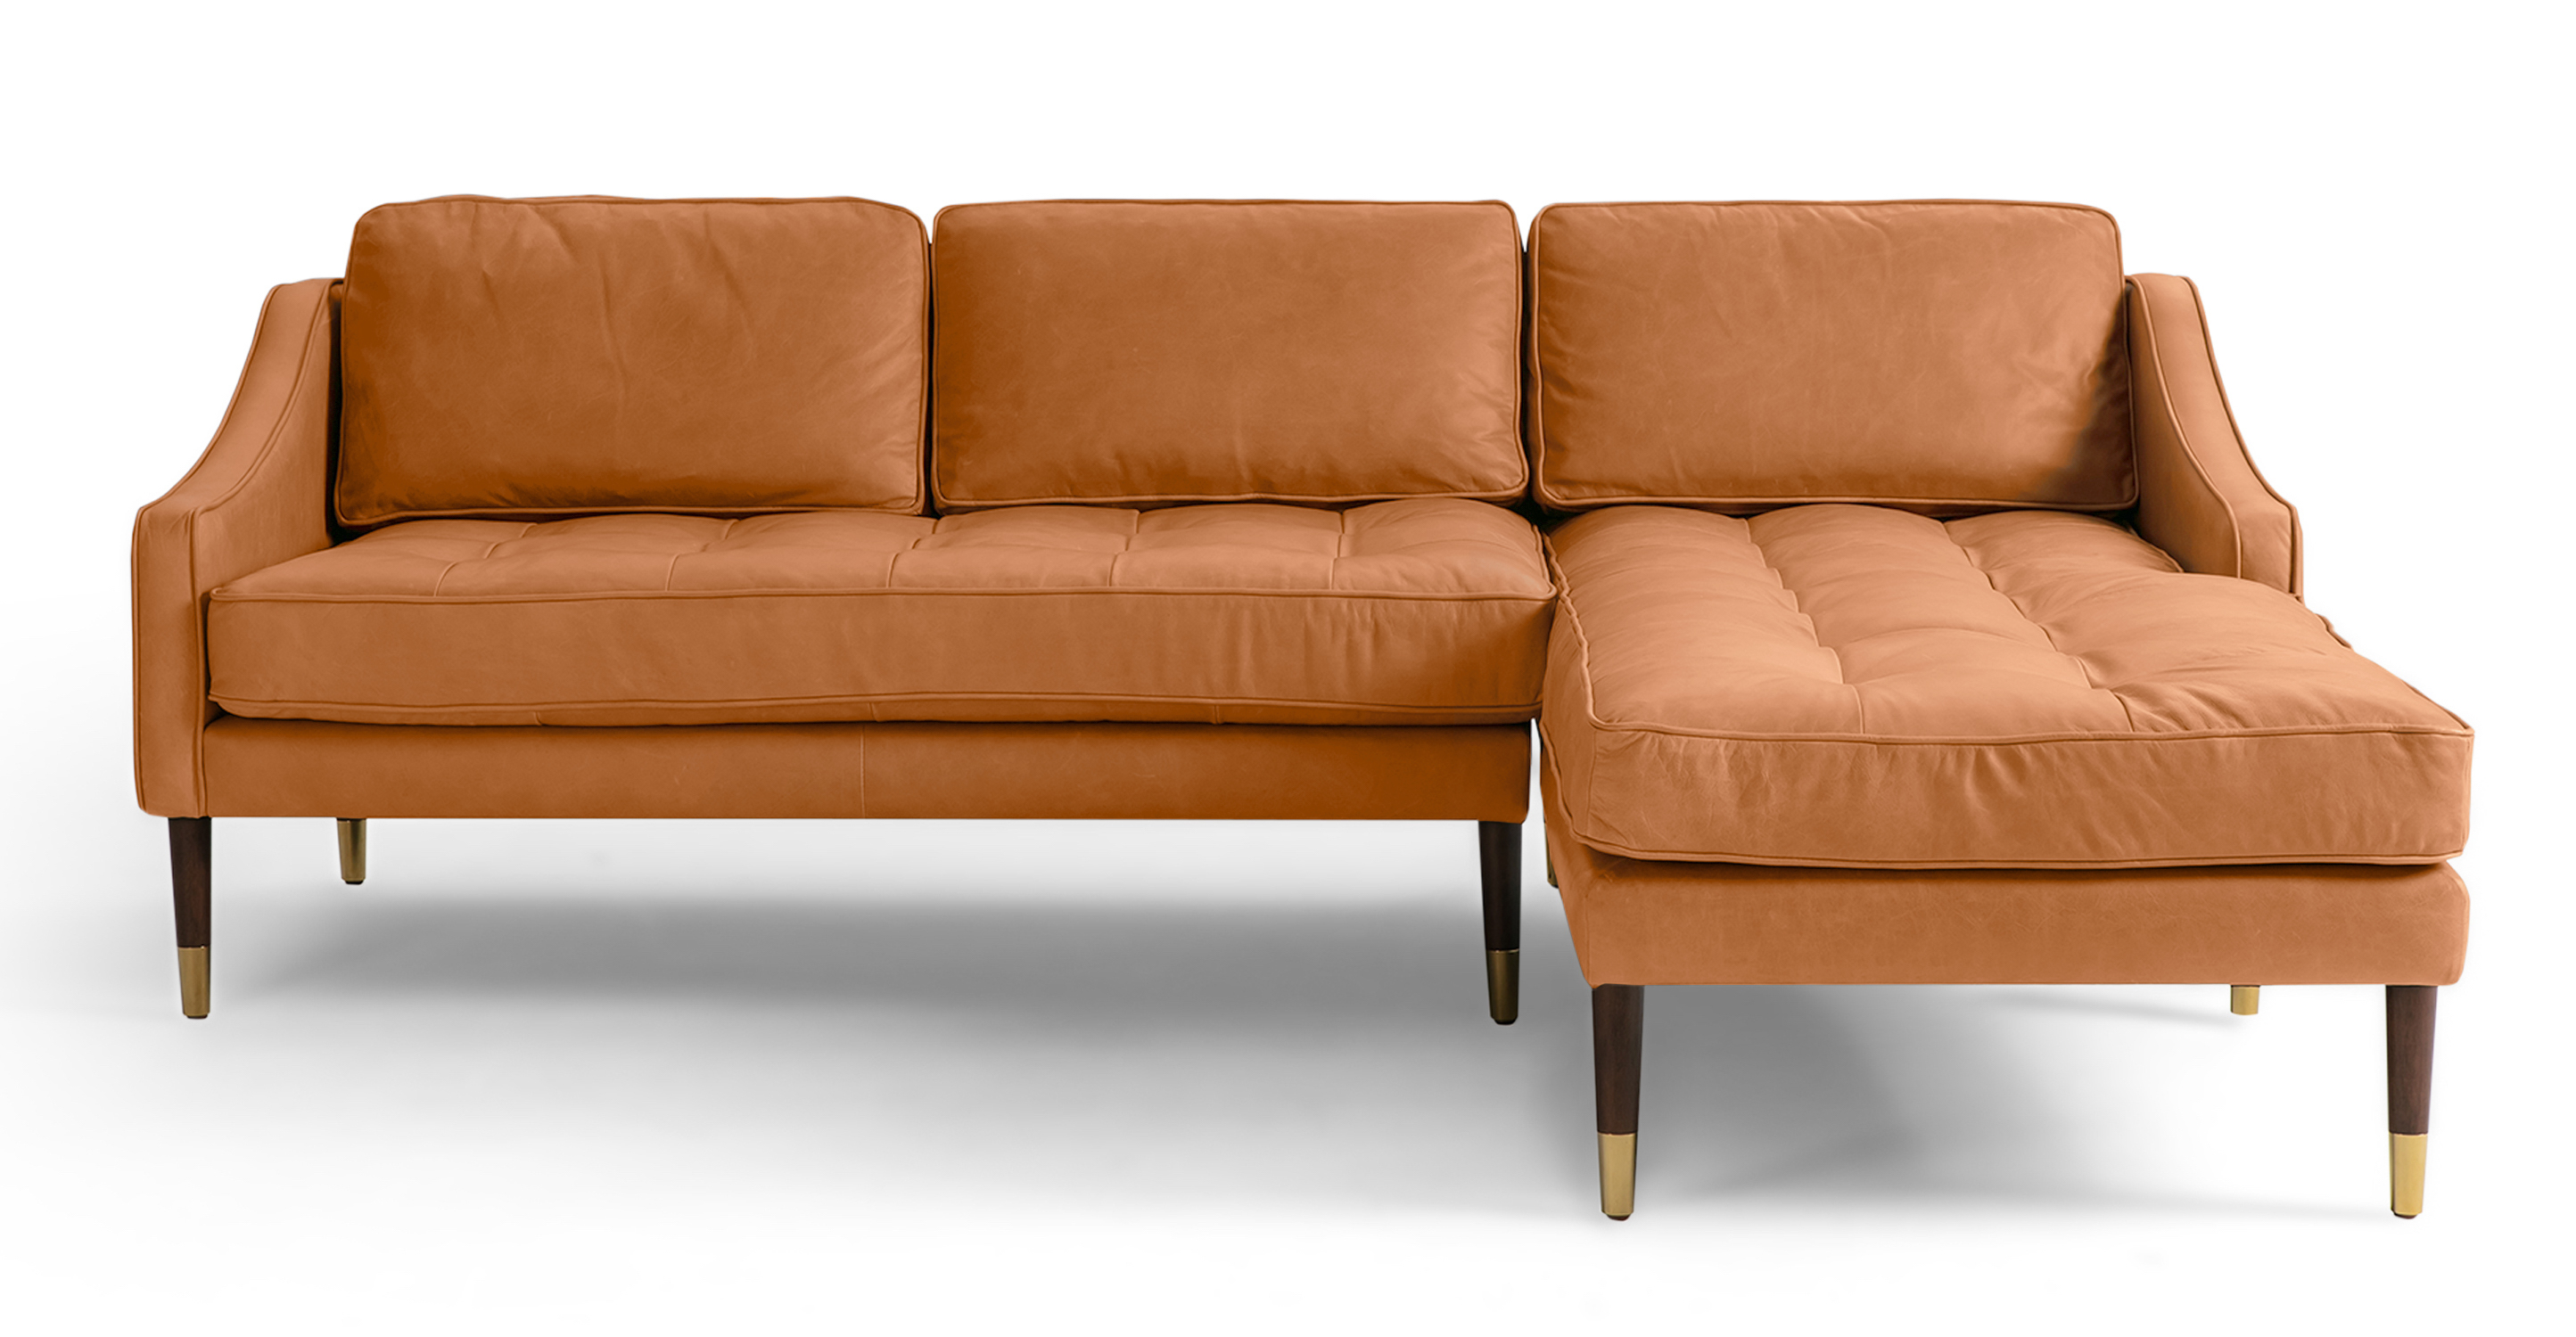 Brando is a modern sectional in light brown leather. The chaise of the sectional, when you are facing the sectional, is on the right and the sofa portion is on the left. Walnut stained legs with gold tips toward the floor. The sofa fully upholstered and has swooping arms that taper from the back, down to the front. Both back and seat cushions are removable. The back cushion is smooth, the seat cushion is tufted. (facing front)